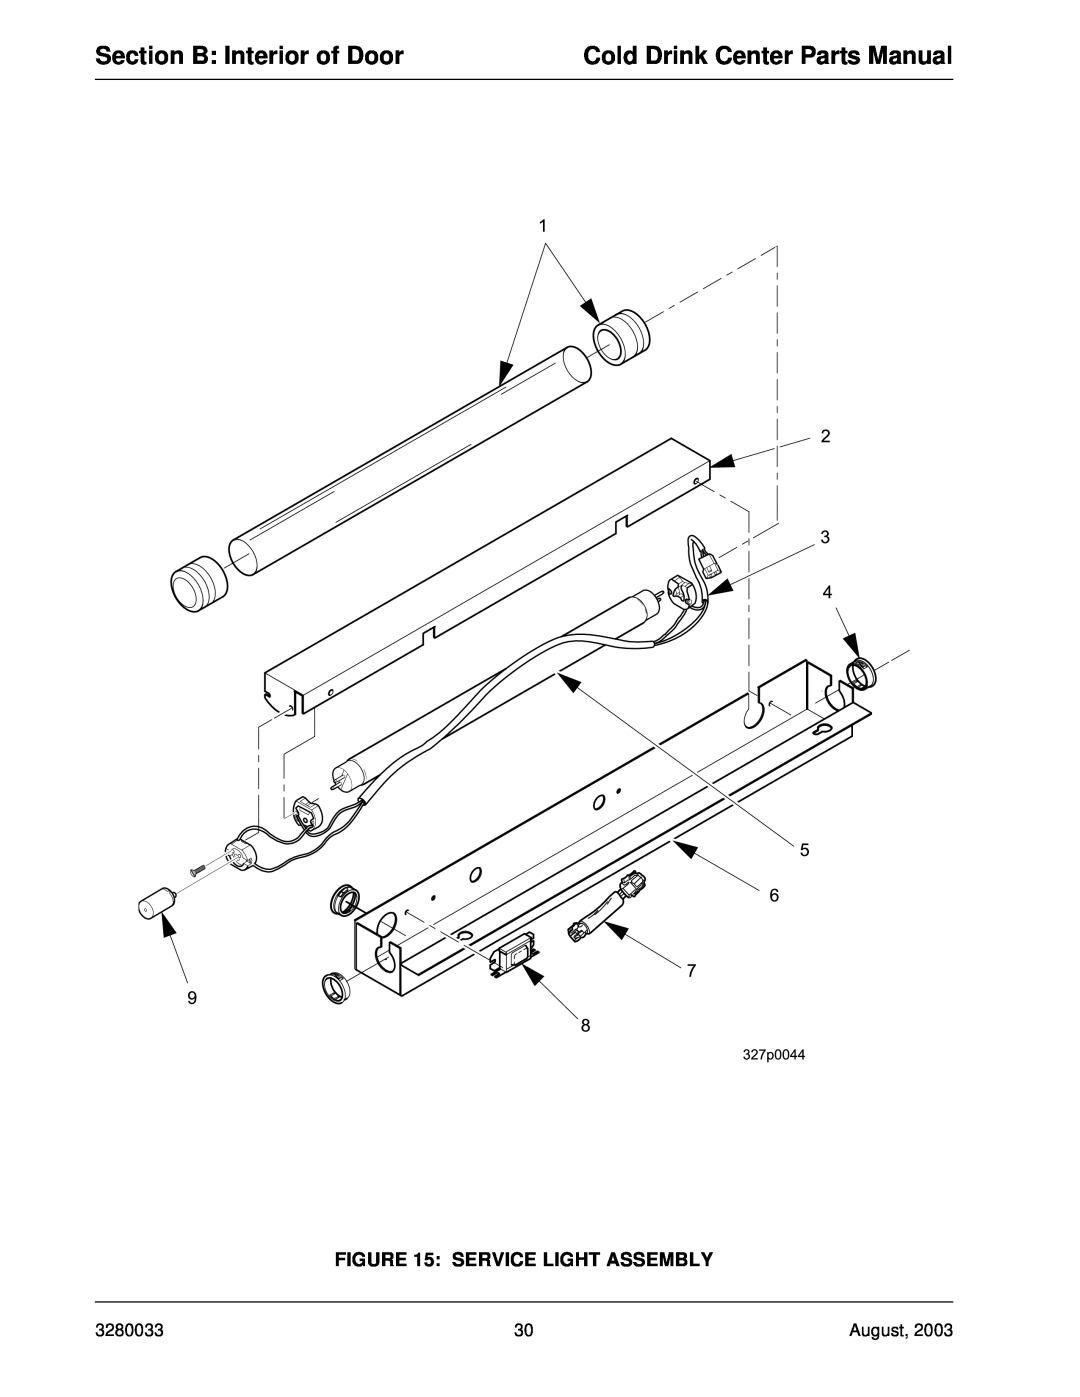 Crane Merchandising Systems 328, 327 Section B Interior of Door, Cold Drink Center Parts Manual, Service Light Assembly 